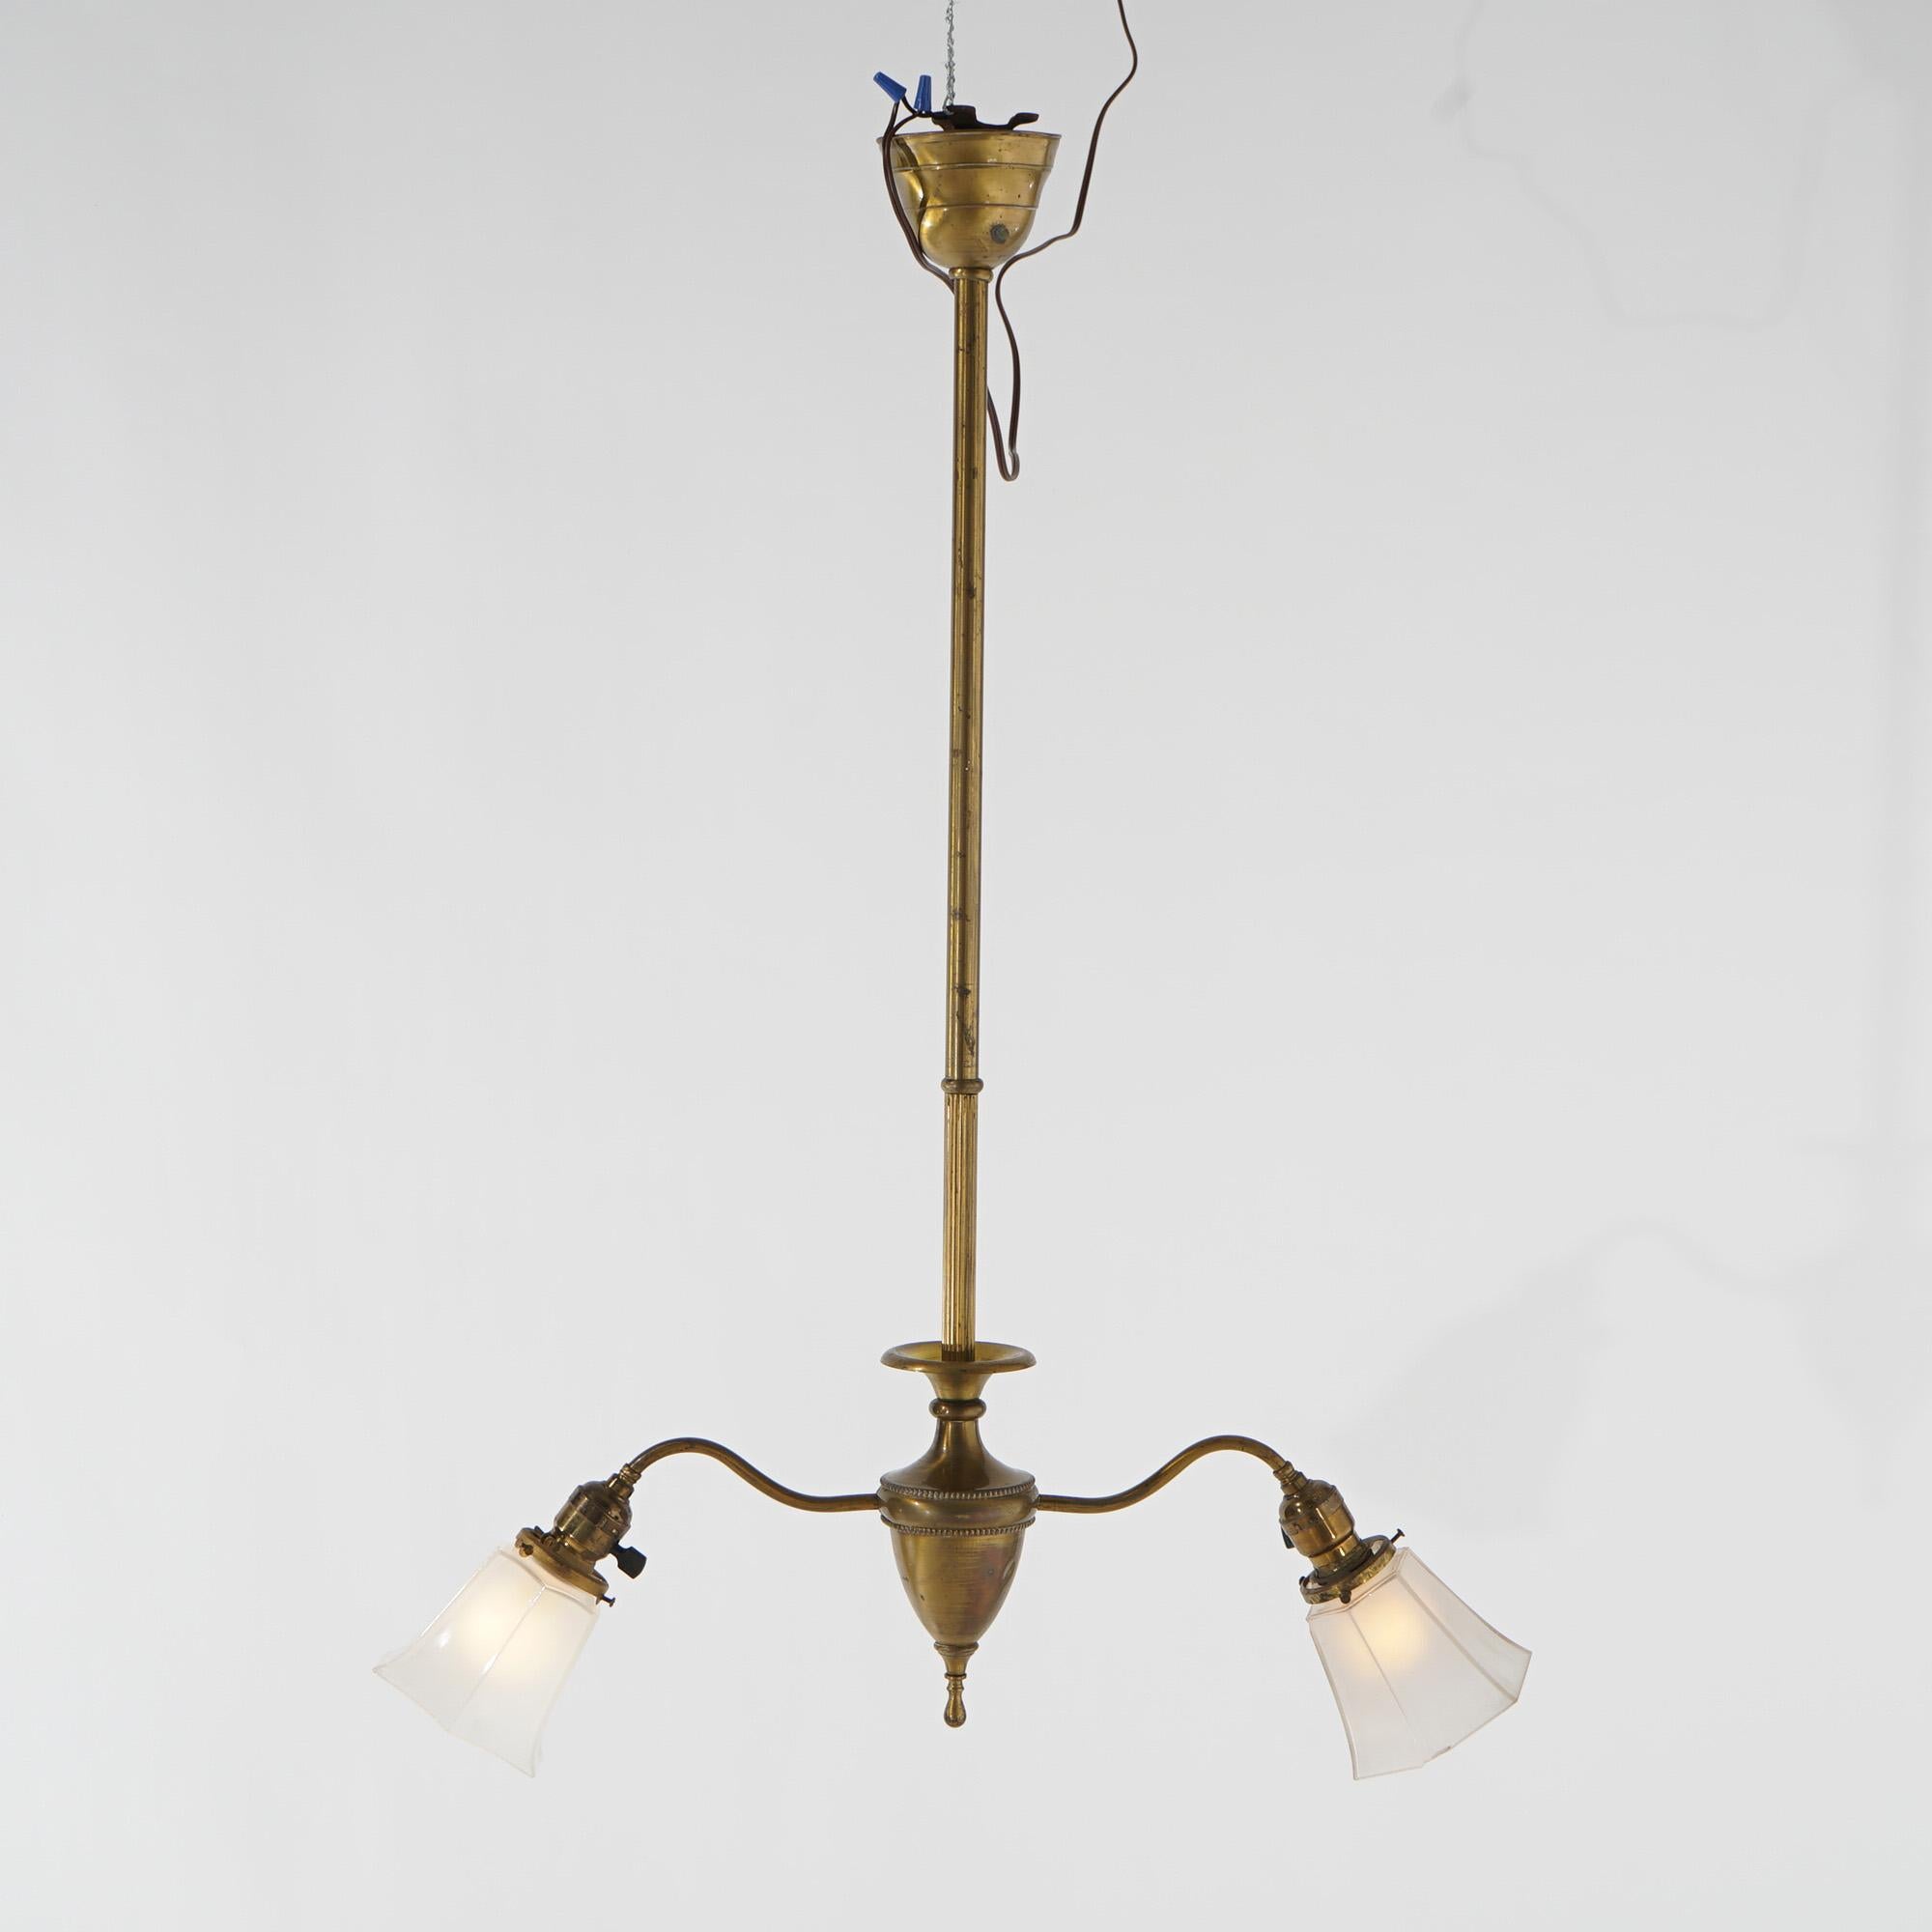 American Antique Brass & Gilt Metal Two-Light Ceiling Fixture Circa 1920 For Sale